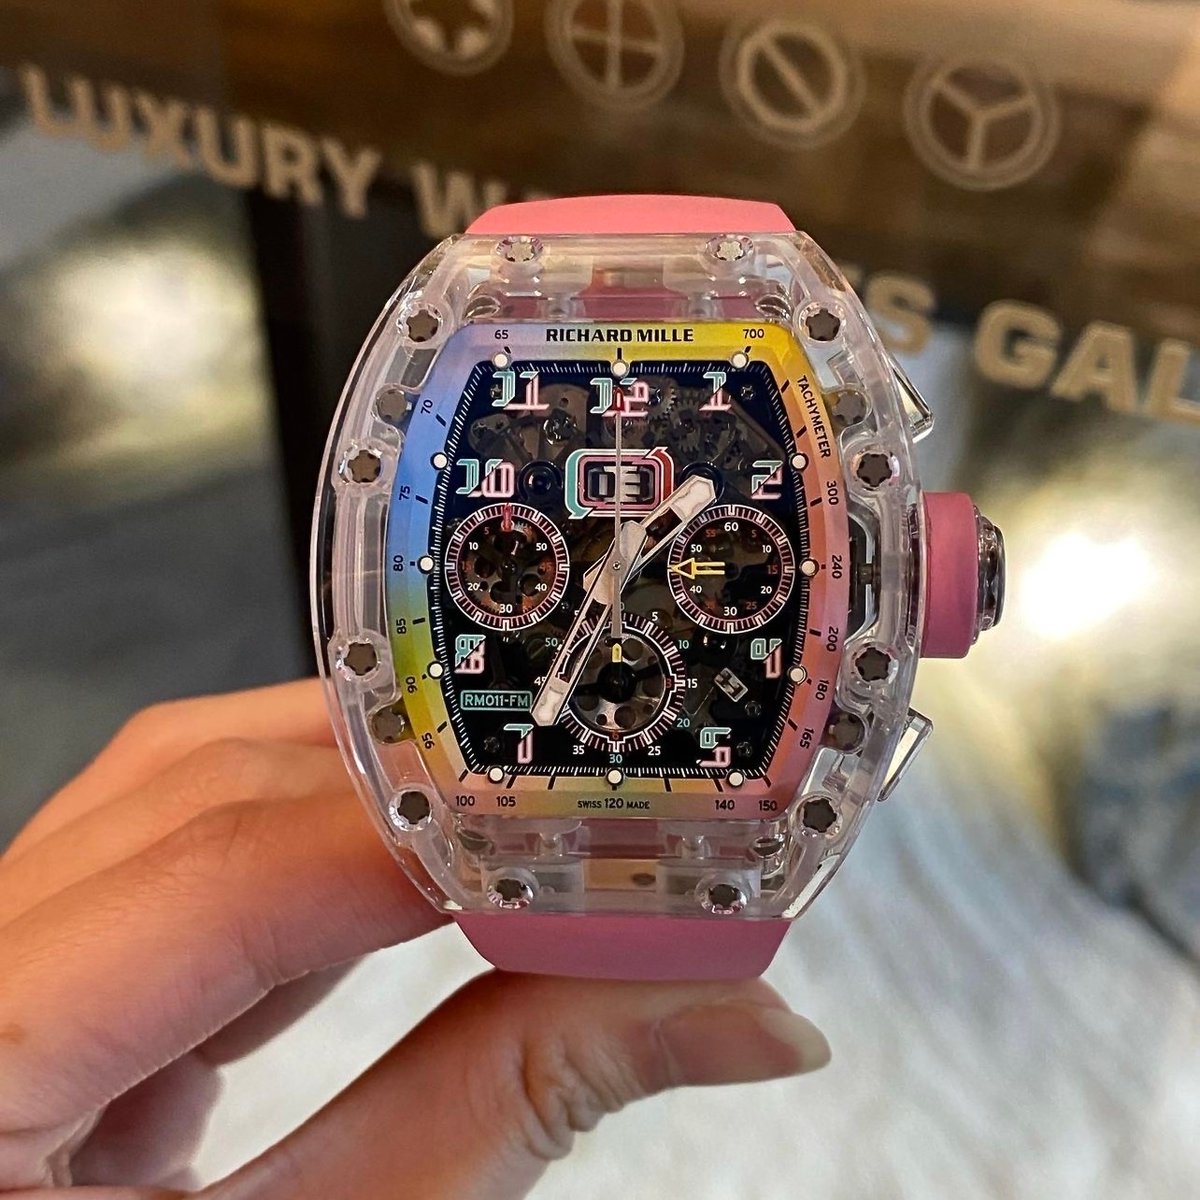 The Most Iconic AET REMOULD Richard Mille Sapphire RM 011 Revealed!!
.
Watch Details 手錶詳情: bit.ly/3NMe2Fa
.
.
.
.
.
#richardmilleWatches #RM011 #RichardMilleClub #menfashionreview #mensfashion #menfashion #Luxury #luxuryStyle